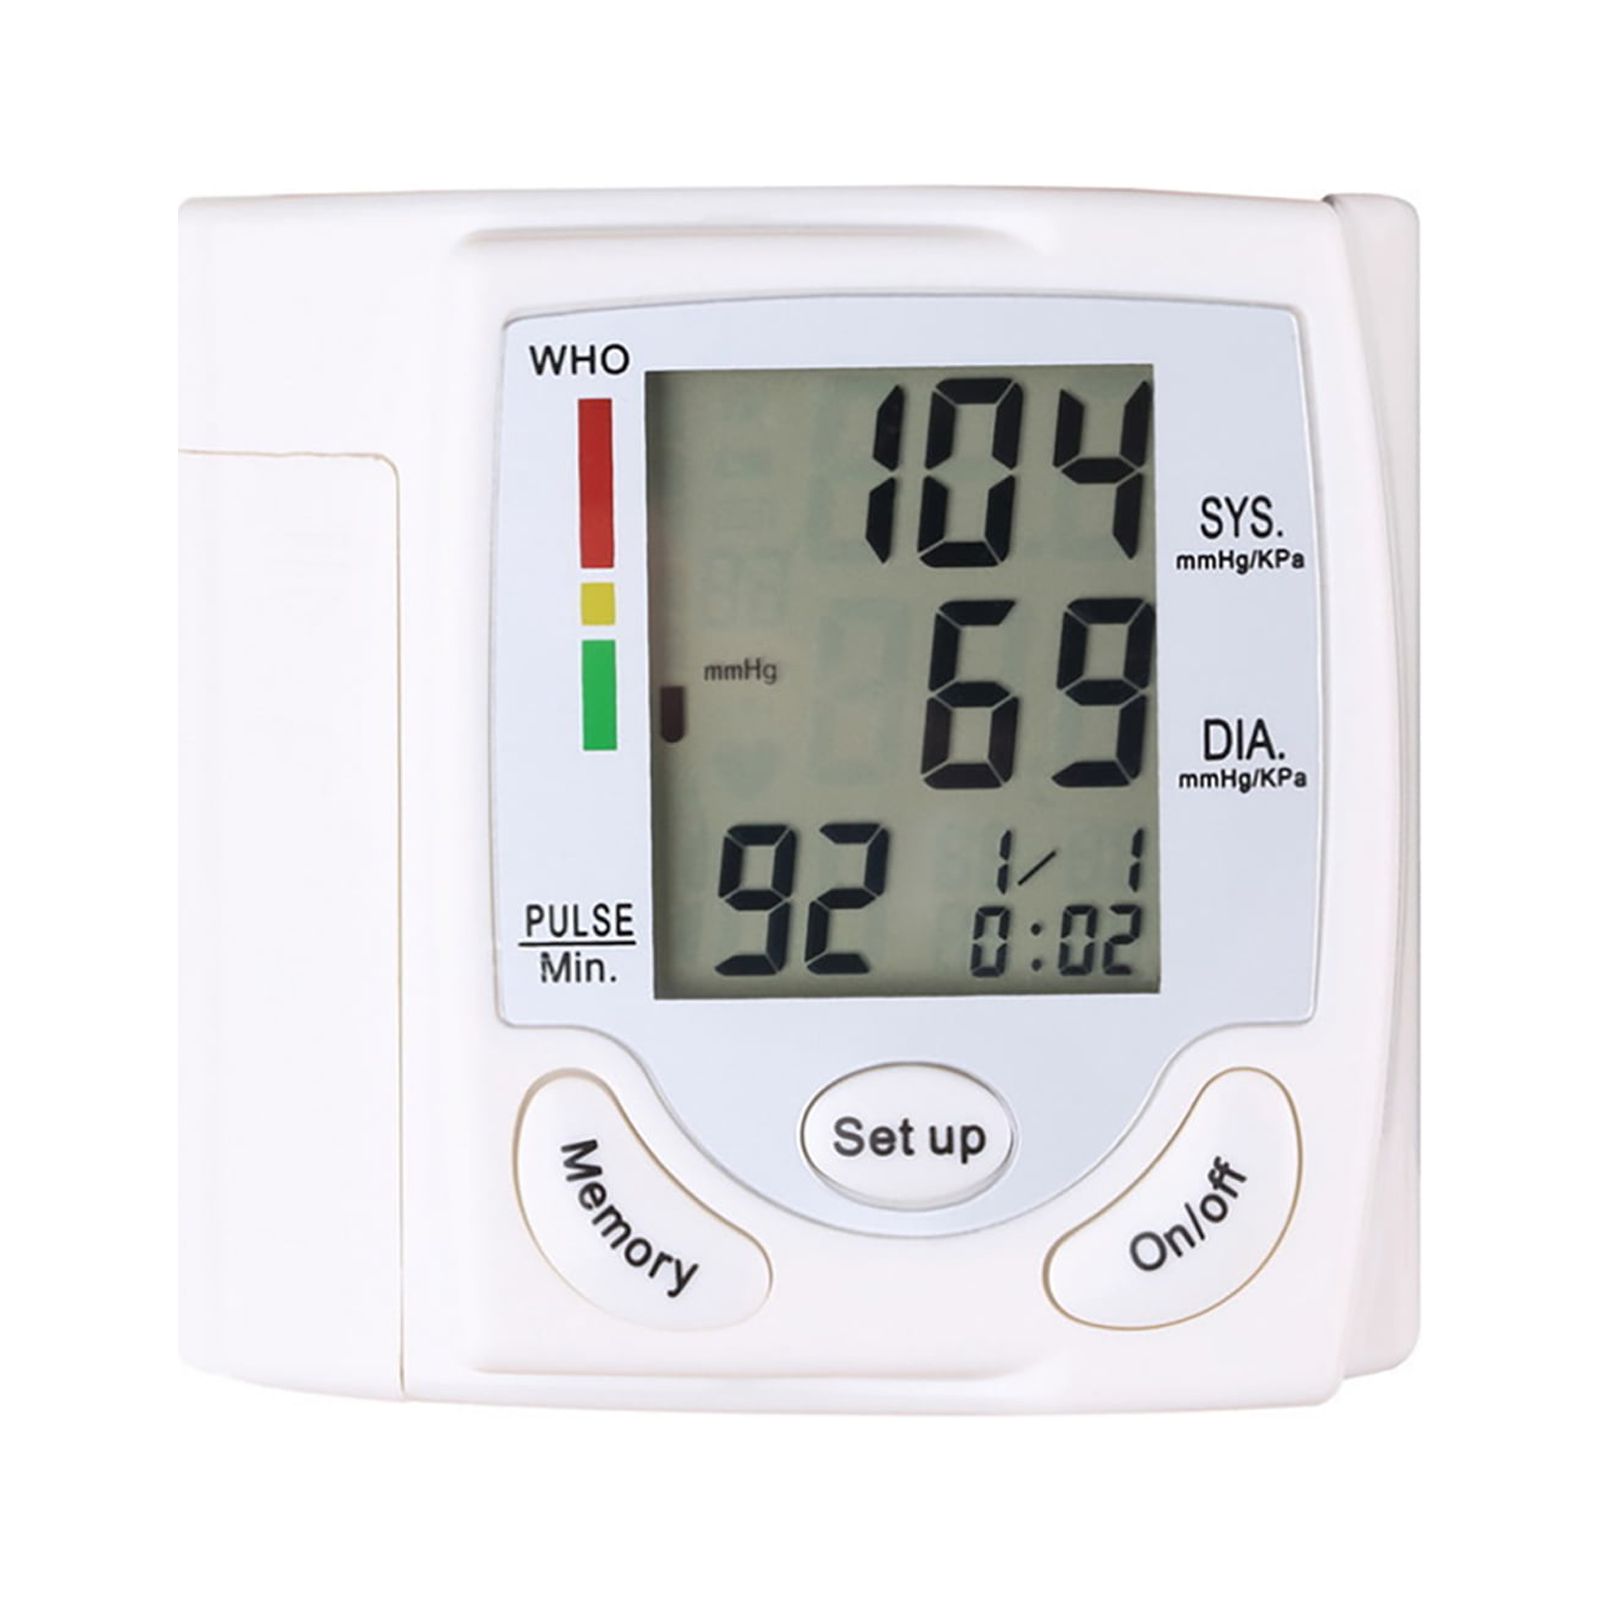 AURORA TRADE Blood Pressure Monitor-Wrist Cuff Automatic Digital Blood Pressure Meter, Accurate BP Machine for Home Use, Large Display, Hypertension & Irregular Heartbeat Detector - image 2 of 4